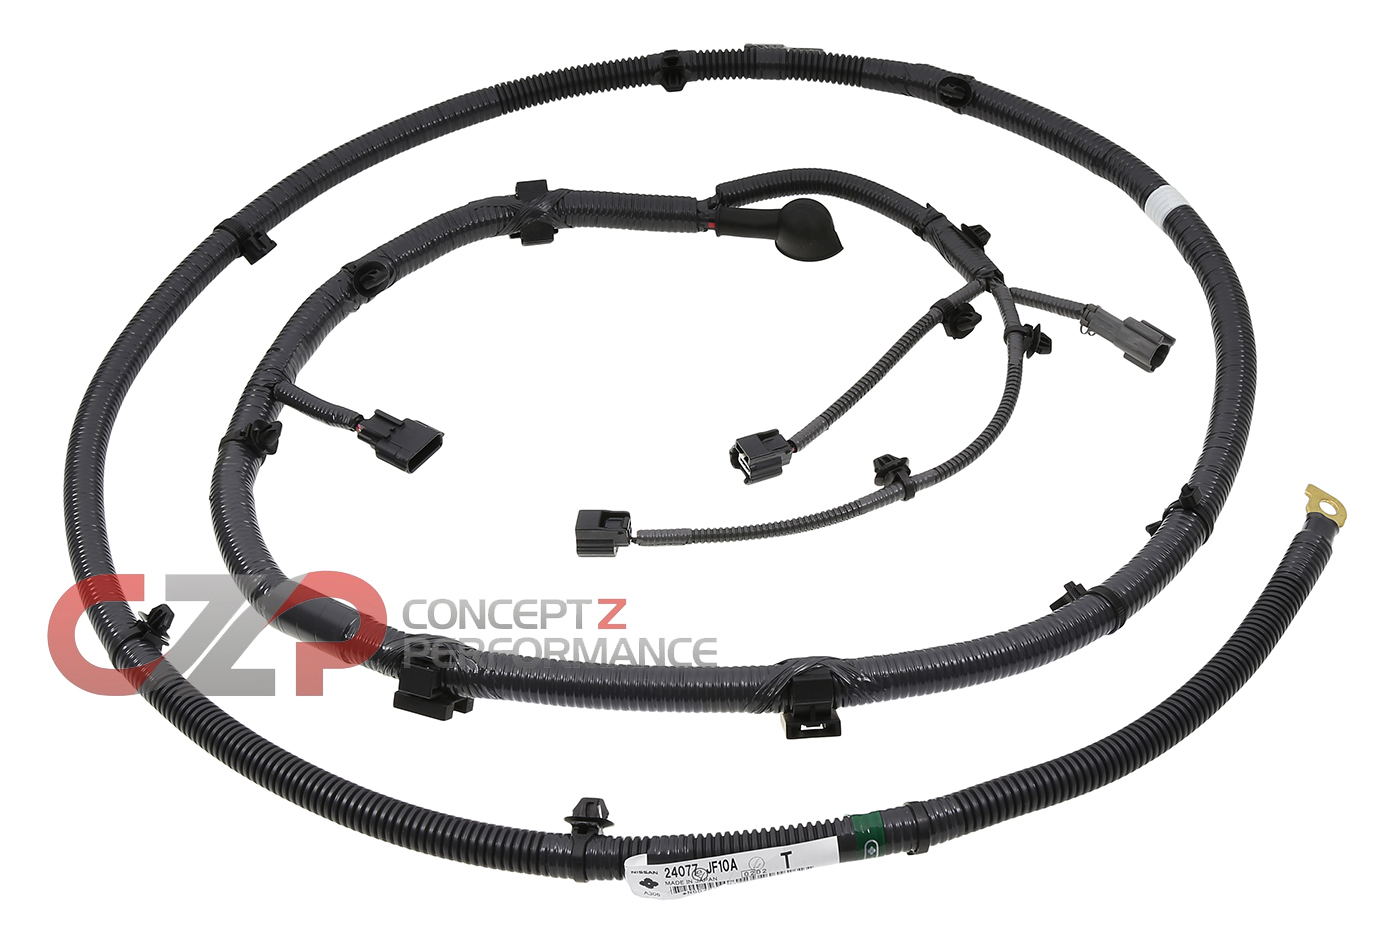 Nissan OEM GT-R Battery Cable & Starter Harness - Nissan GT-R 09+ R35